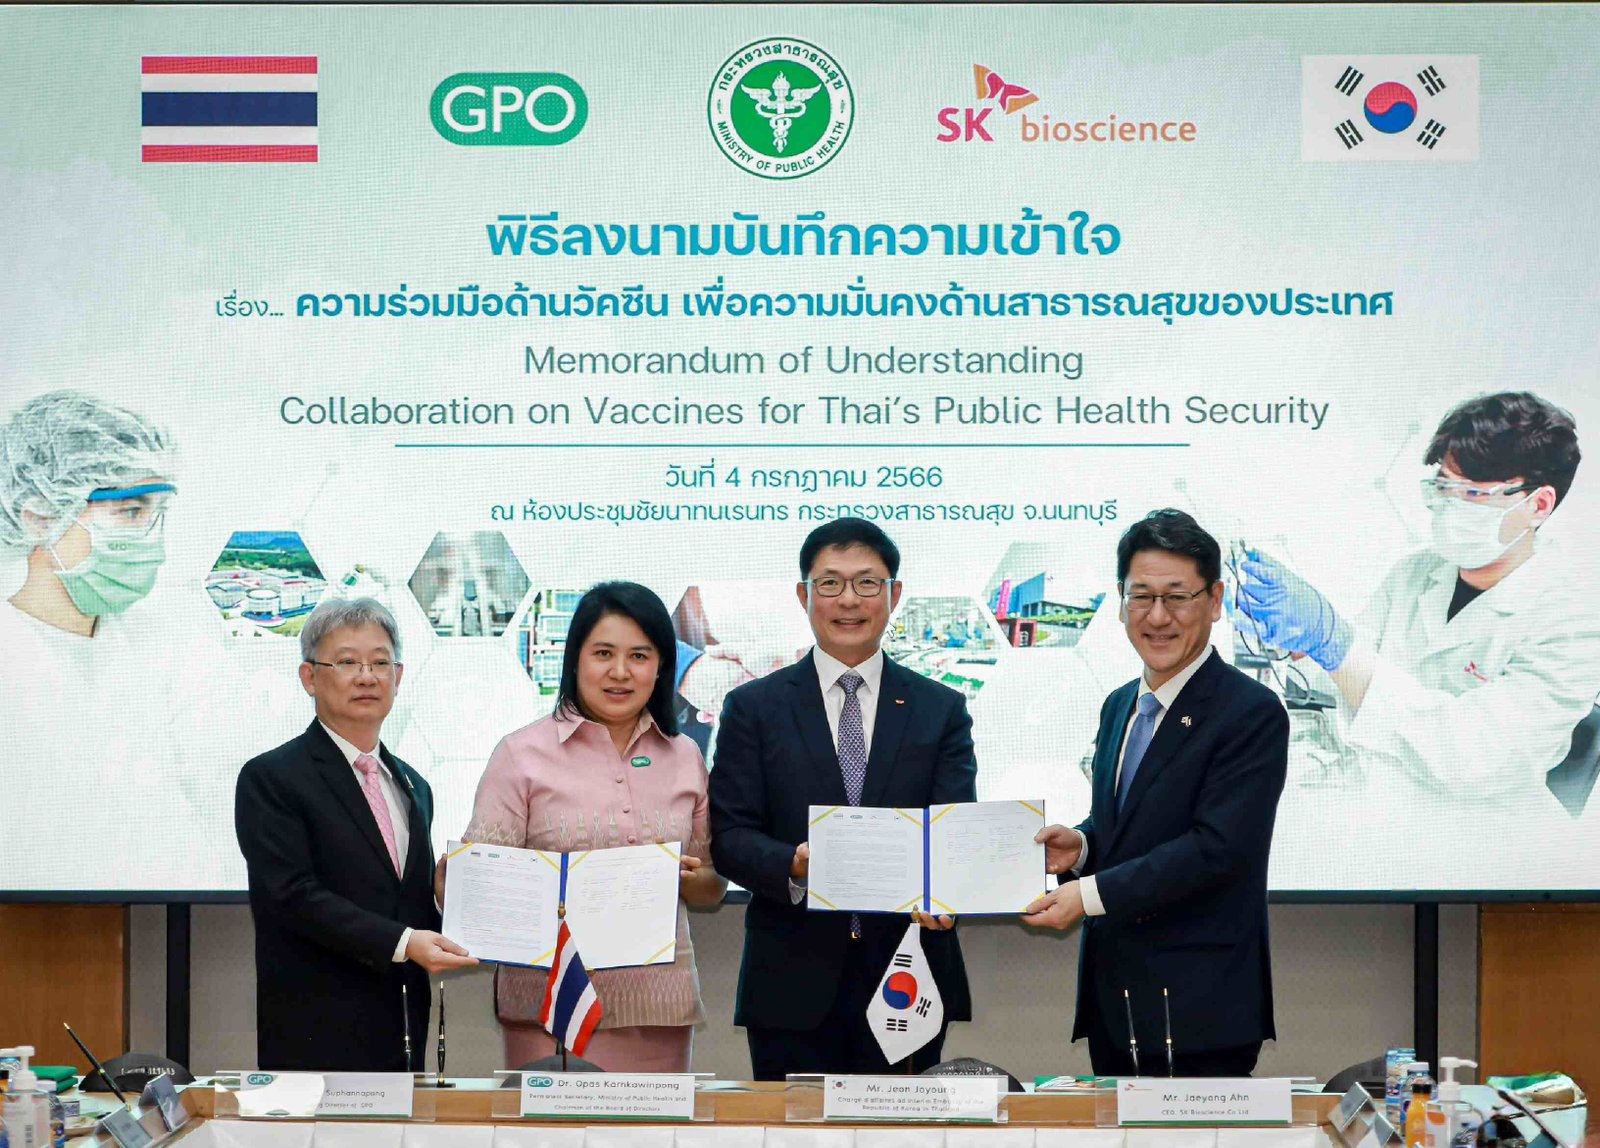 (From left) Dr. Opas Karnkawinpong, Permanent Secretary of the Ministry of Public Health, Dr. Mingkwan Suphannaphong, Managing Director of GPO, Jaeyong Ahn, CEO of SK bioscience, and Joyoung Jeon, Charge d'affaires ad interim, Embassy of the Republic of Korea in Thailand pose after signing a Memorandum of Understanding at the Ministry of Public Health of Thailand on July 4th. 